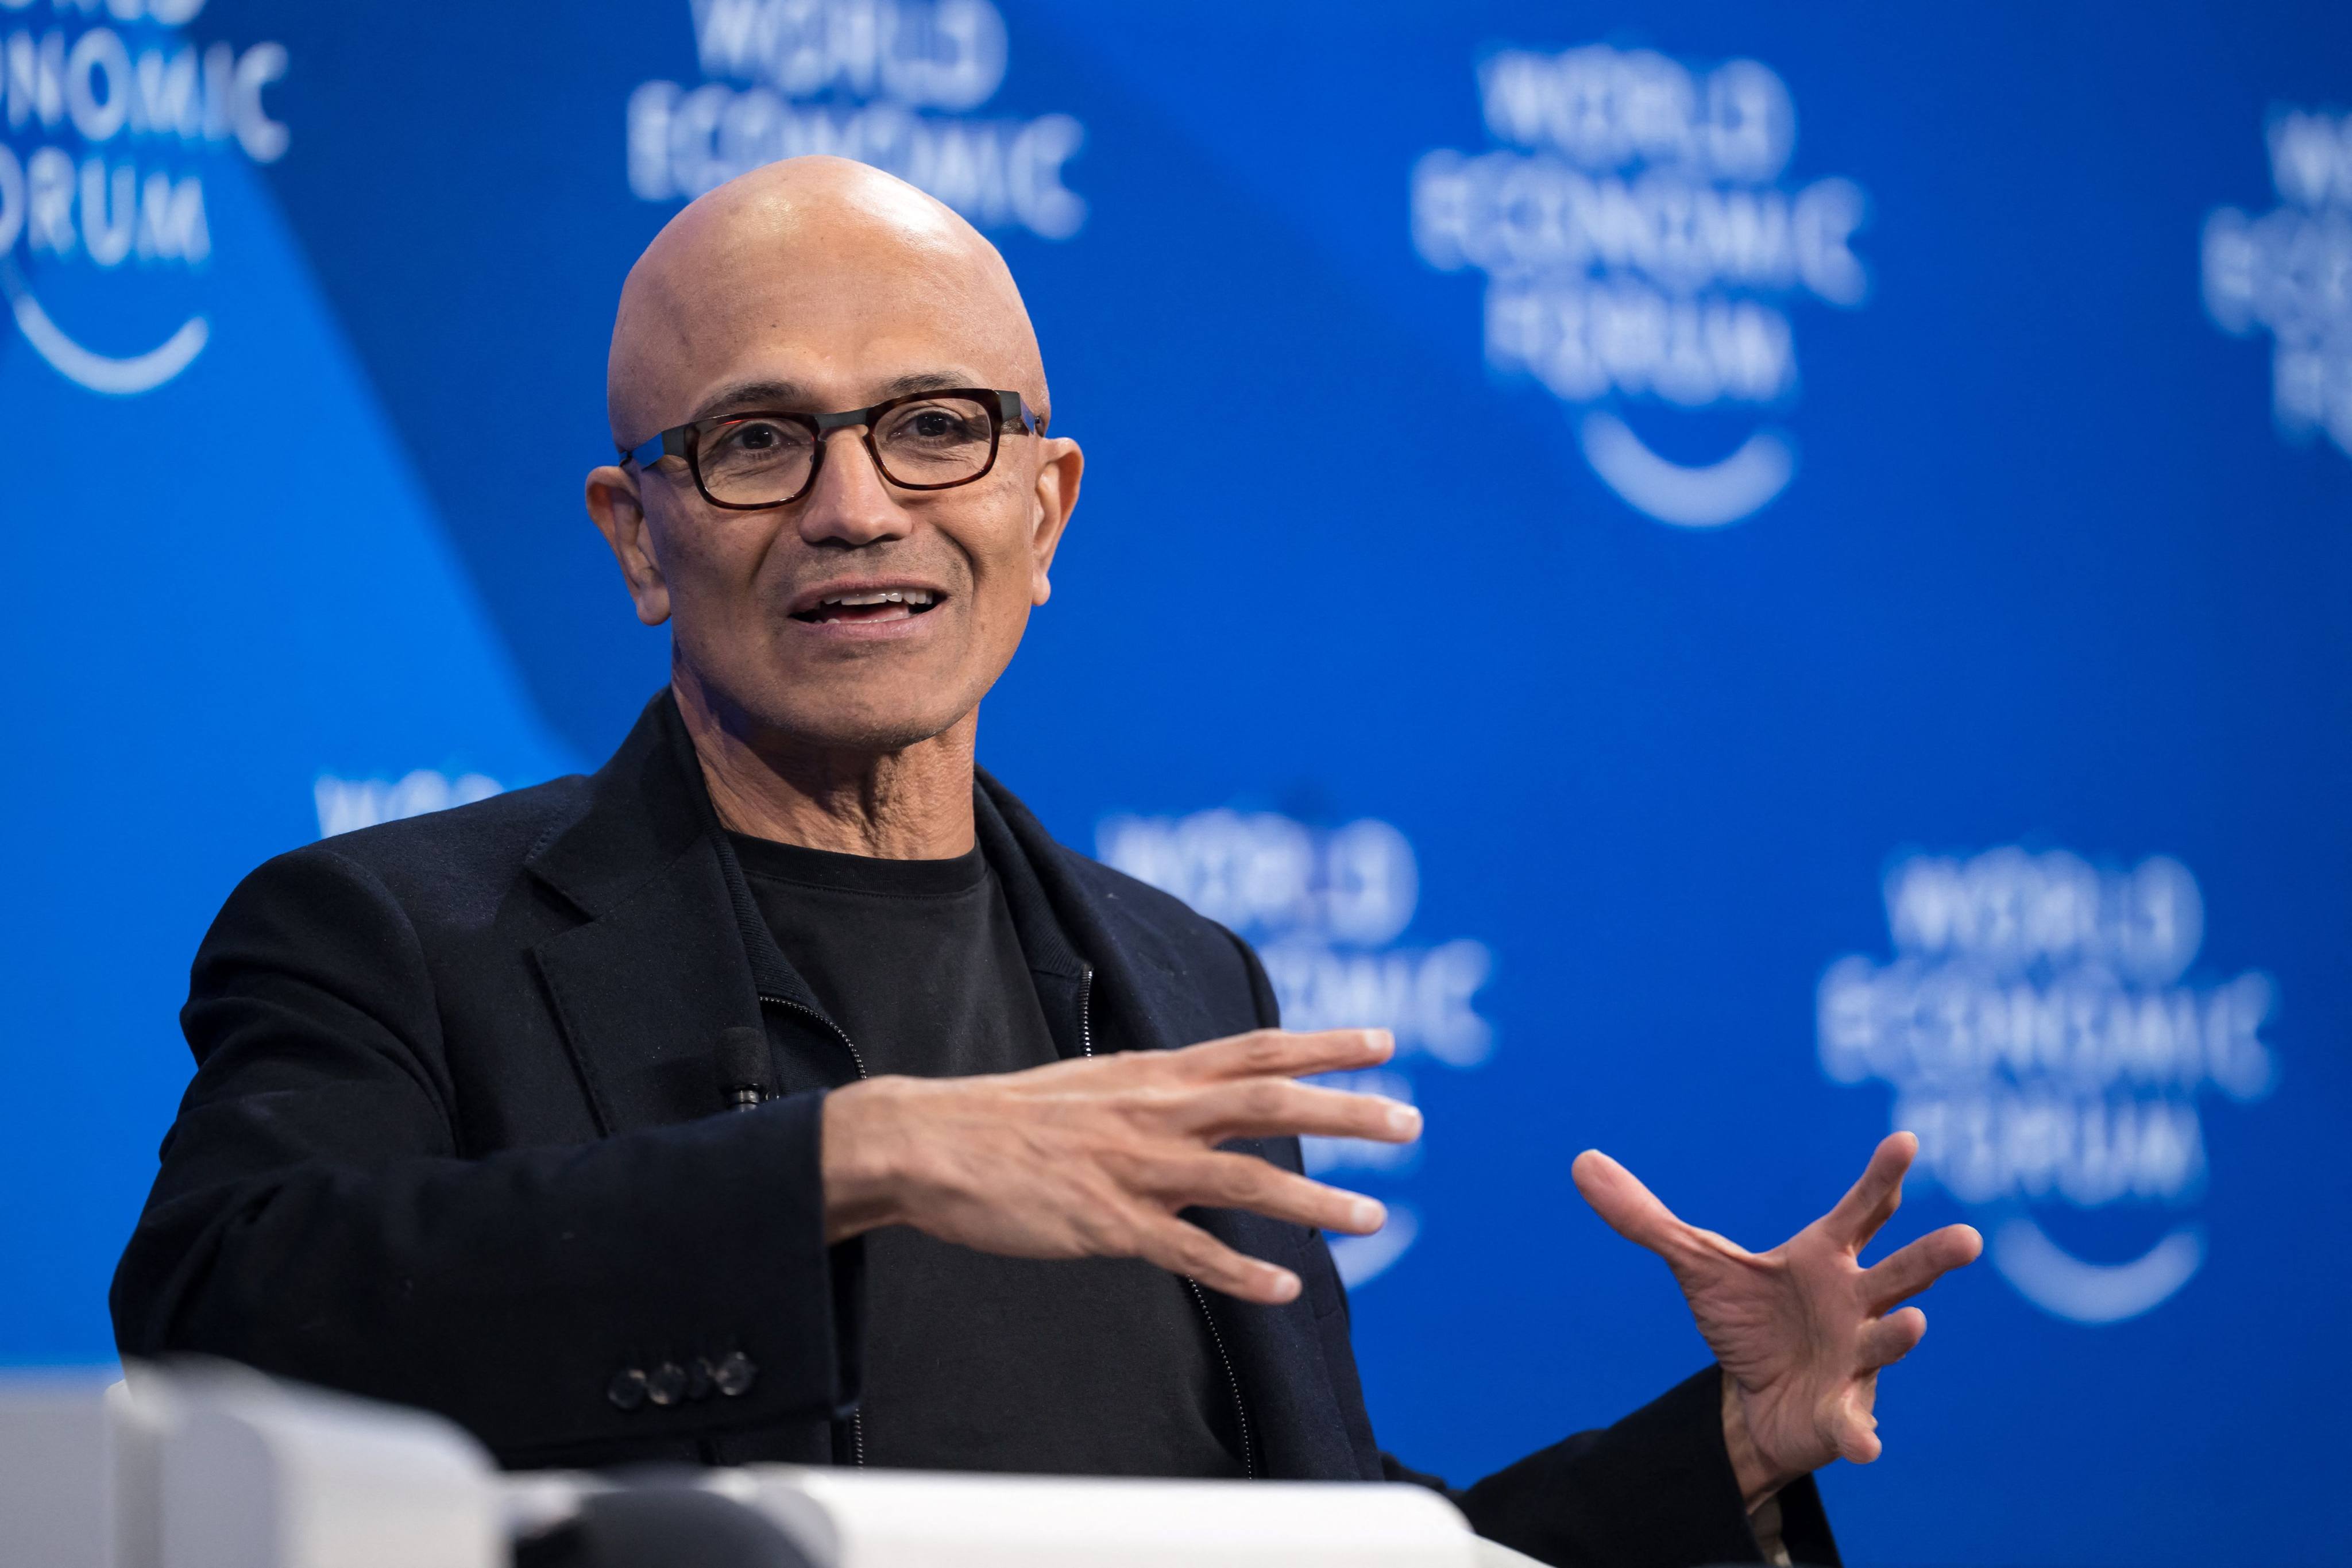 Microsoft CEO Satya Nadella speaks at the World Economic Forum annual meeting in Davos, Switzerland, on Tuesday. Photo: AFP